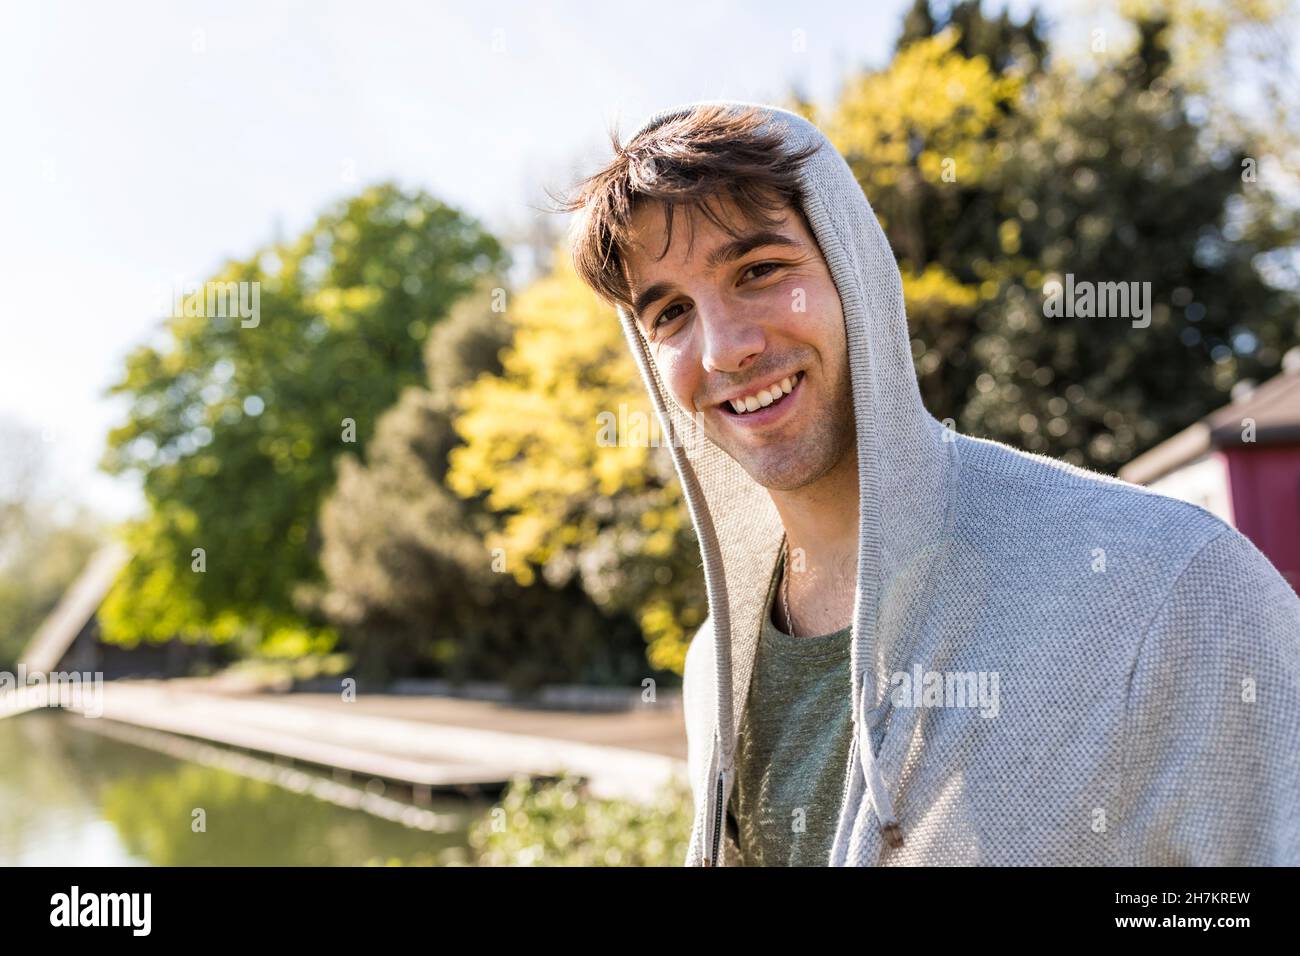 Young man with hooded shirt at park Stock Photo